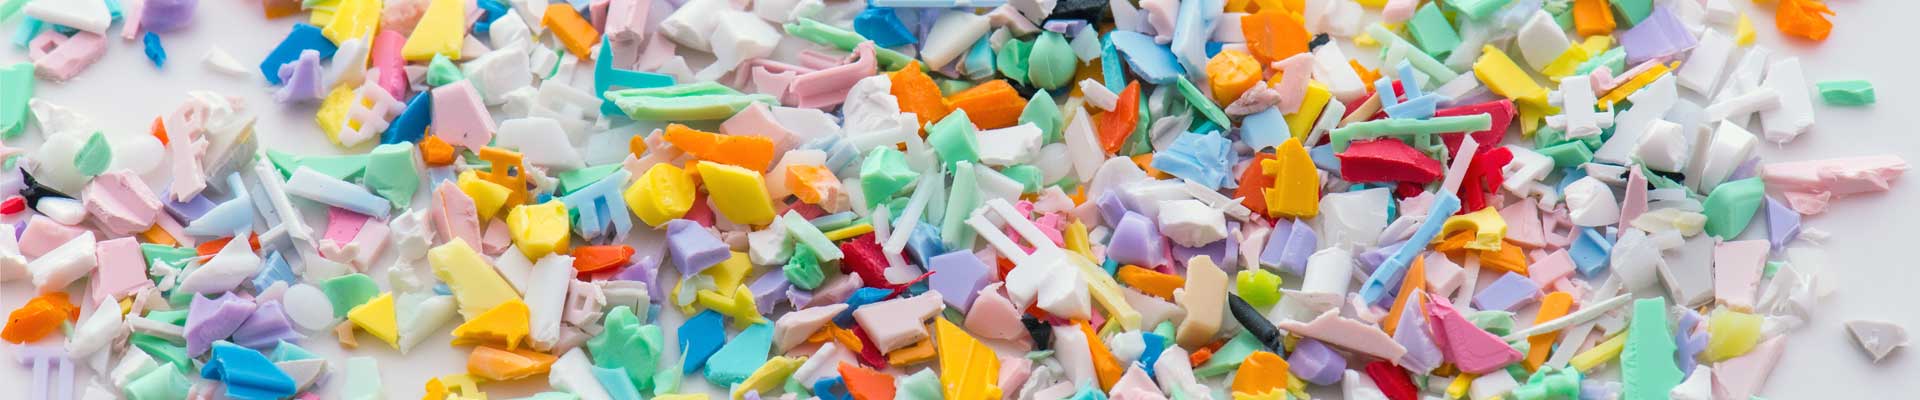 Recycle your plastics in keeping with the times